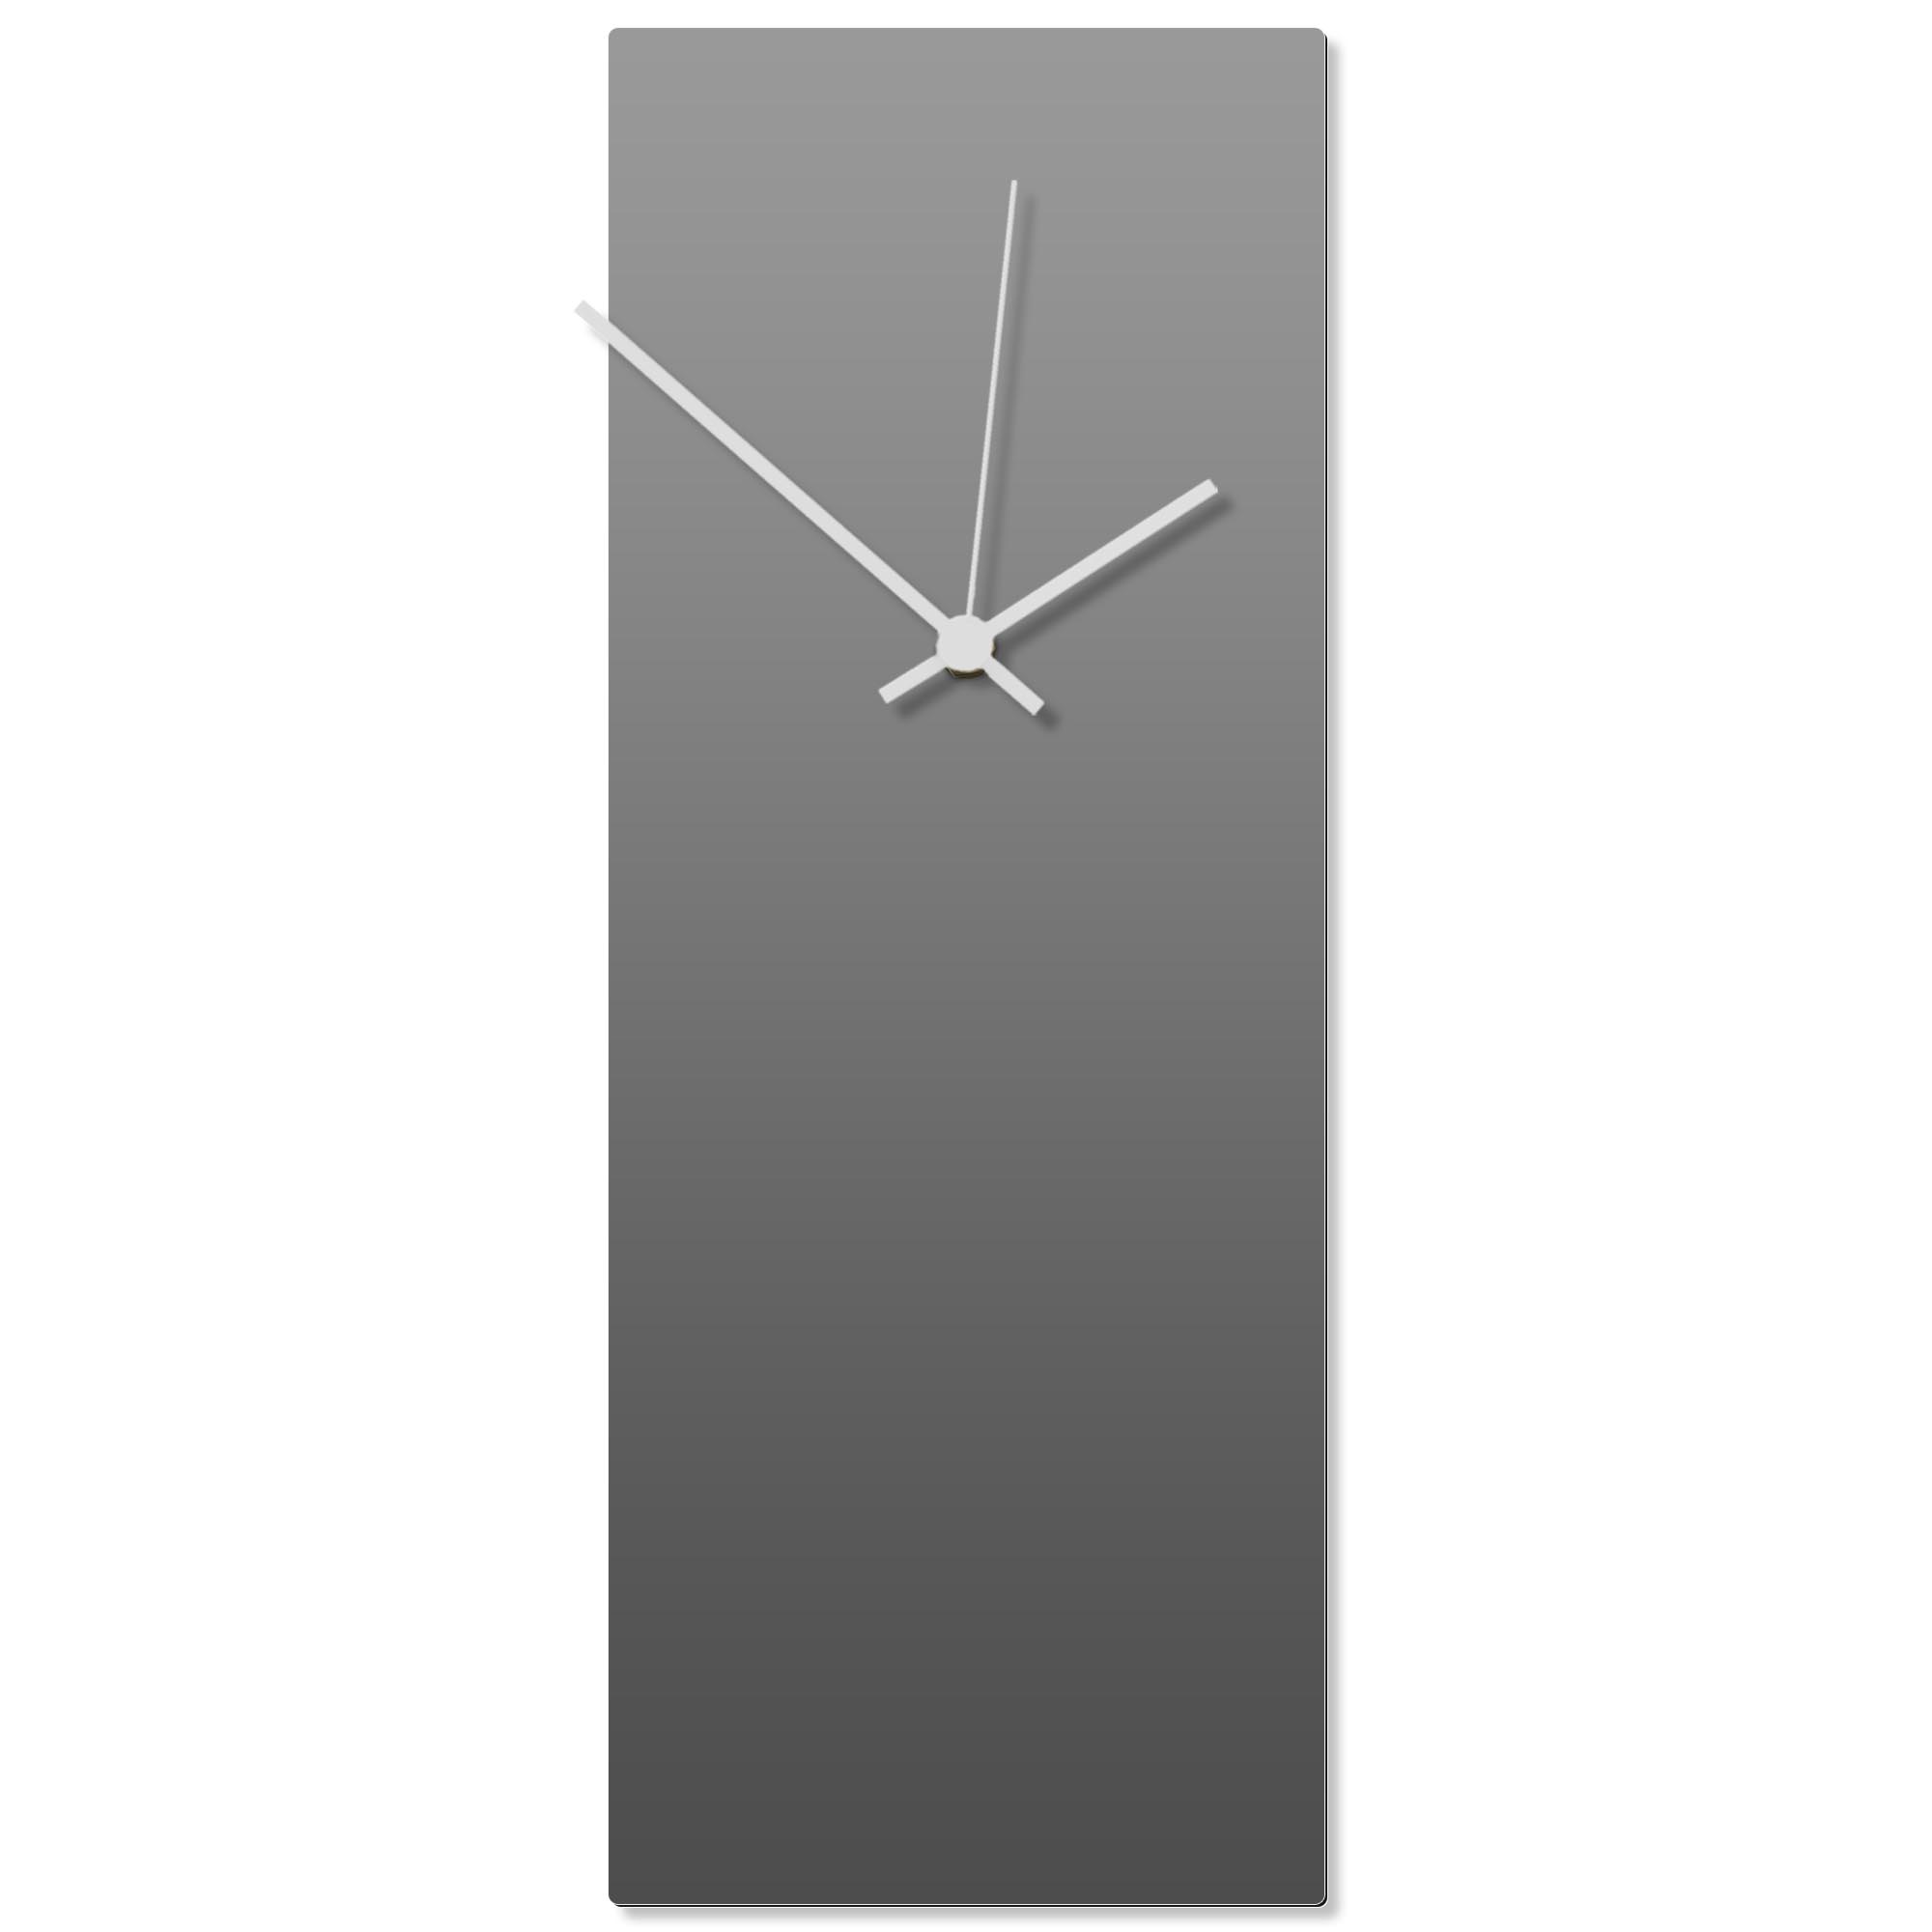 Grayout White Clock Large 8.25x22in. Aluminum Polymetal